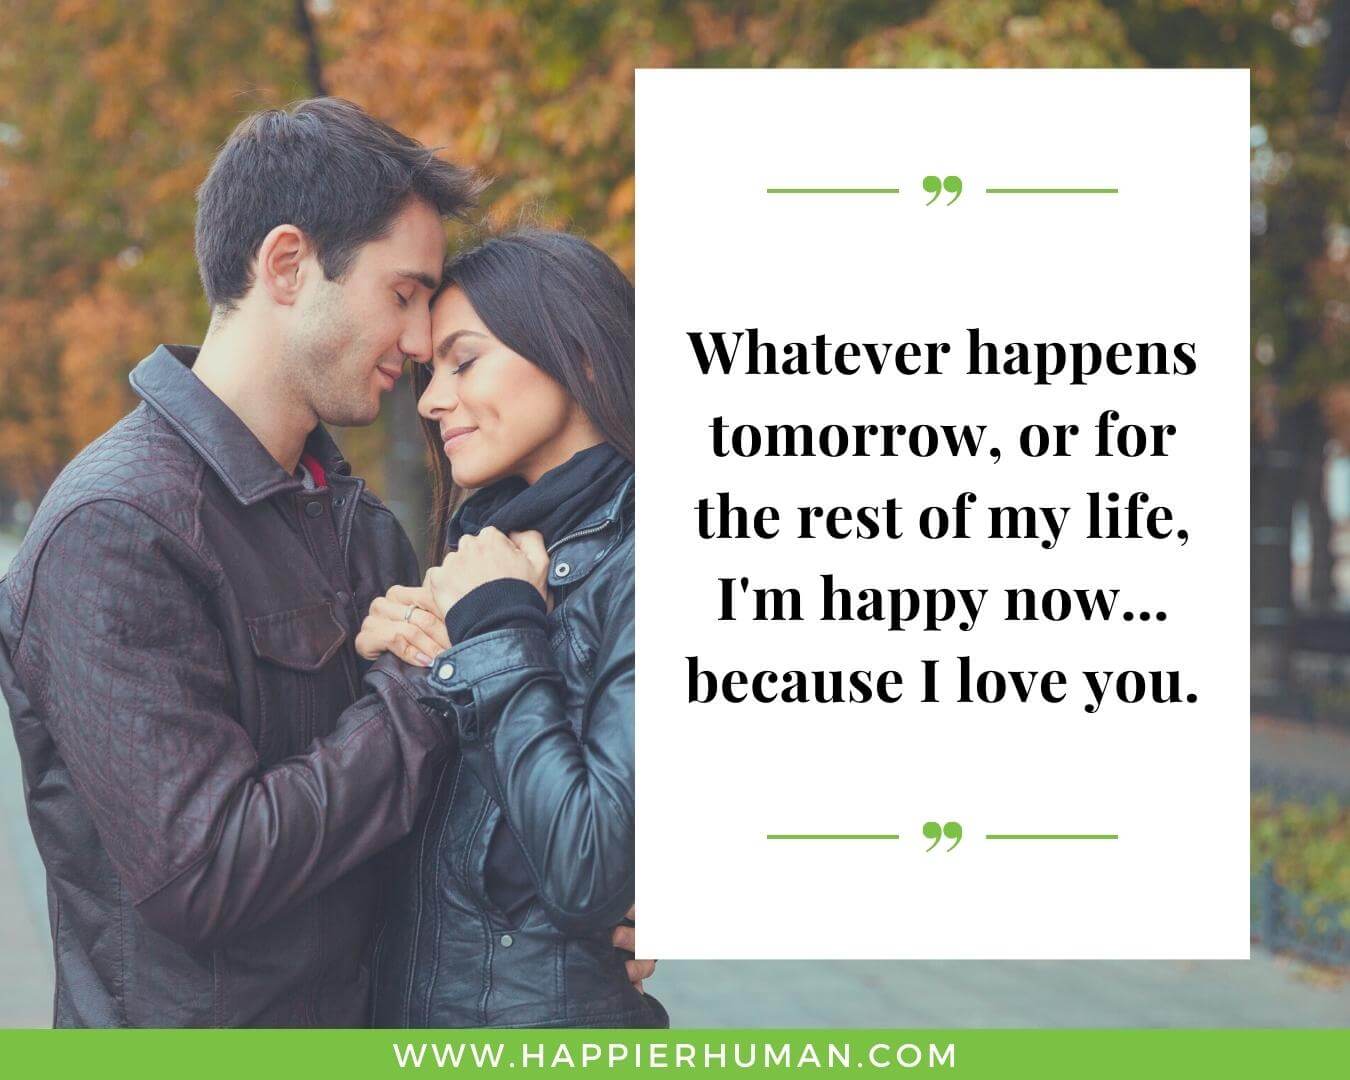 Quotes about love and relationships - “Whatever happens tomorrow, or for the rest of my life, I'm happy now… because I love you.”